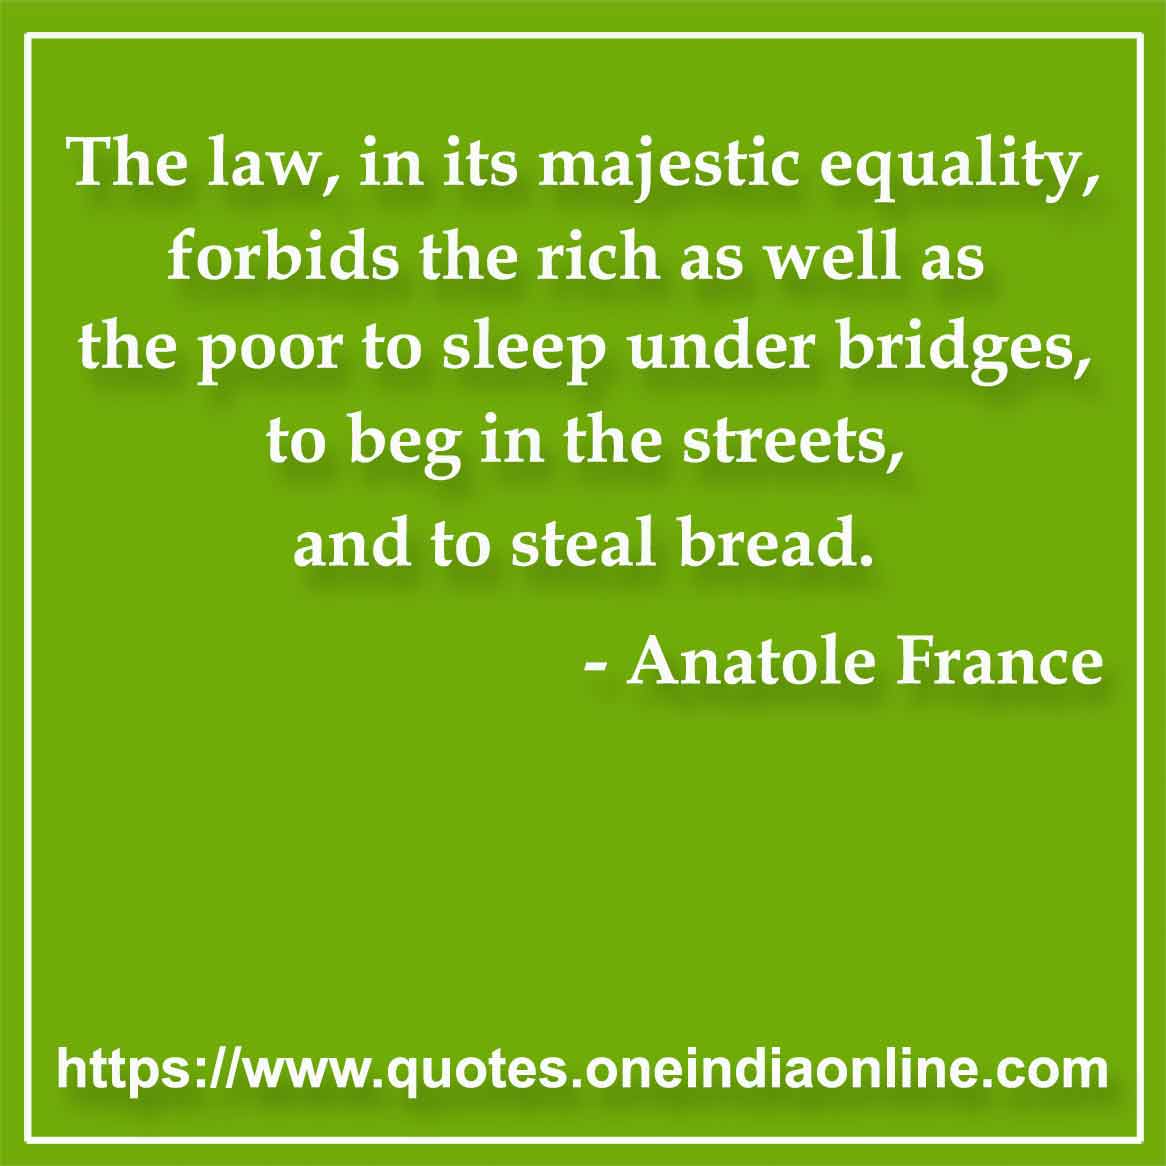 The law, in its majestic equality, forbids the rich as well as the poor to sleep under bridges, to beg in the streets, and to steal bread.

- Law Quotes by Anatole France 